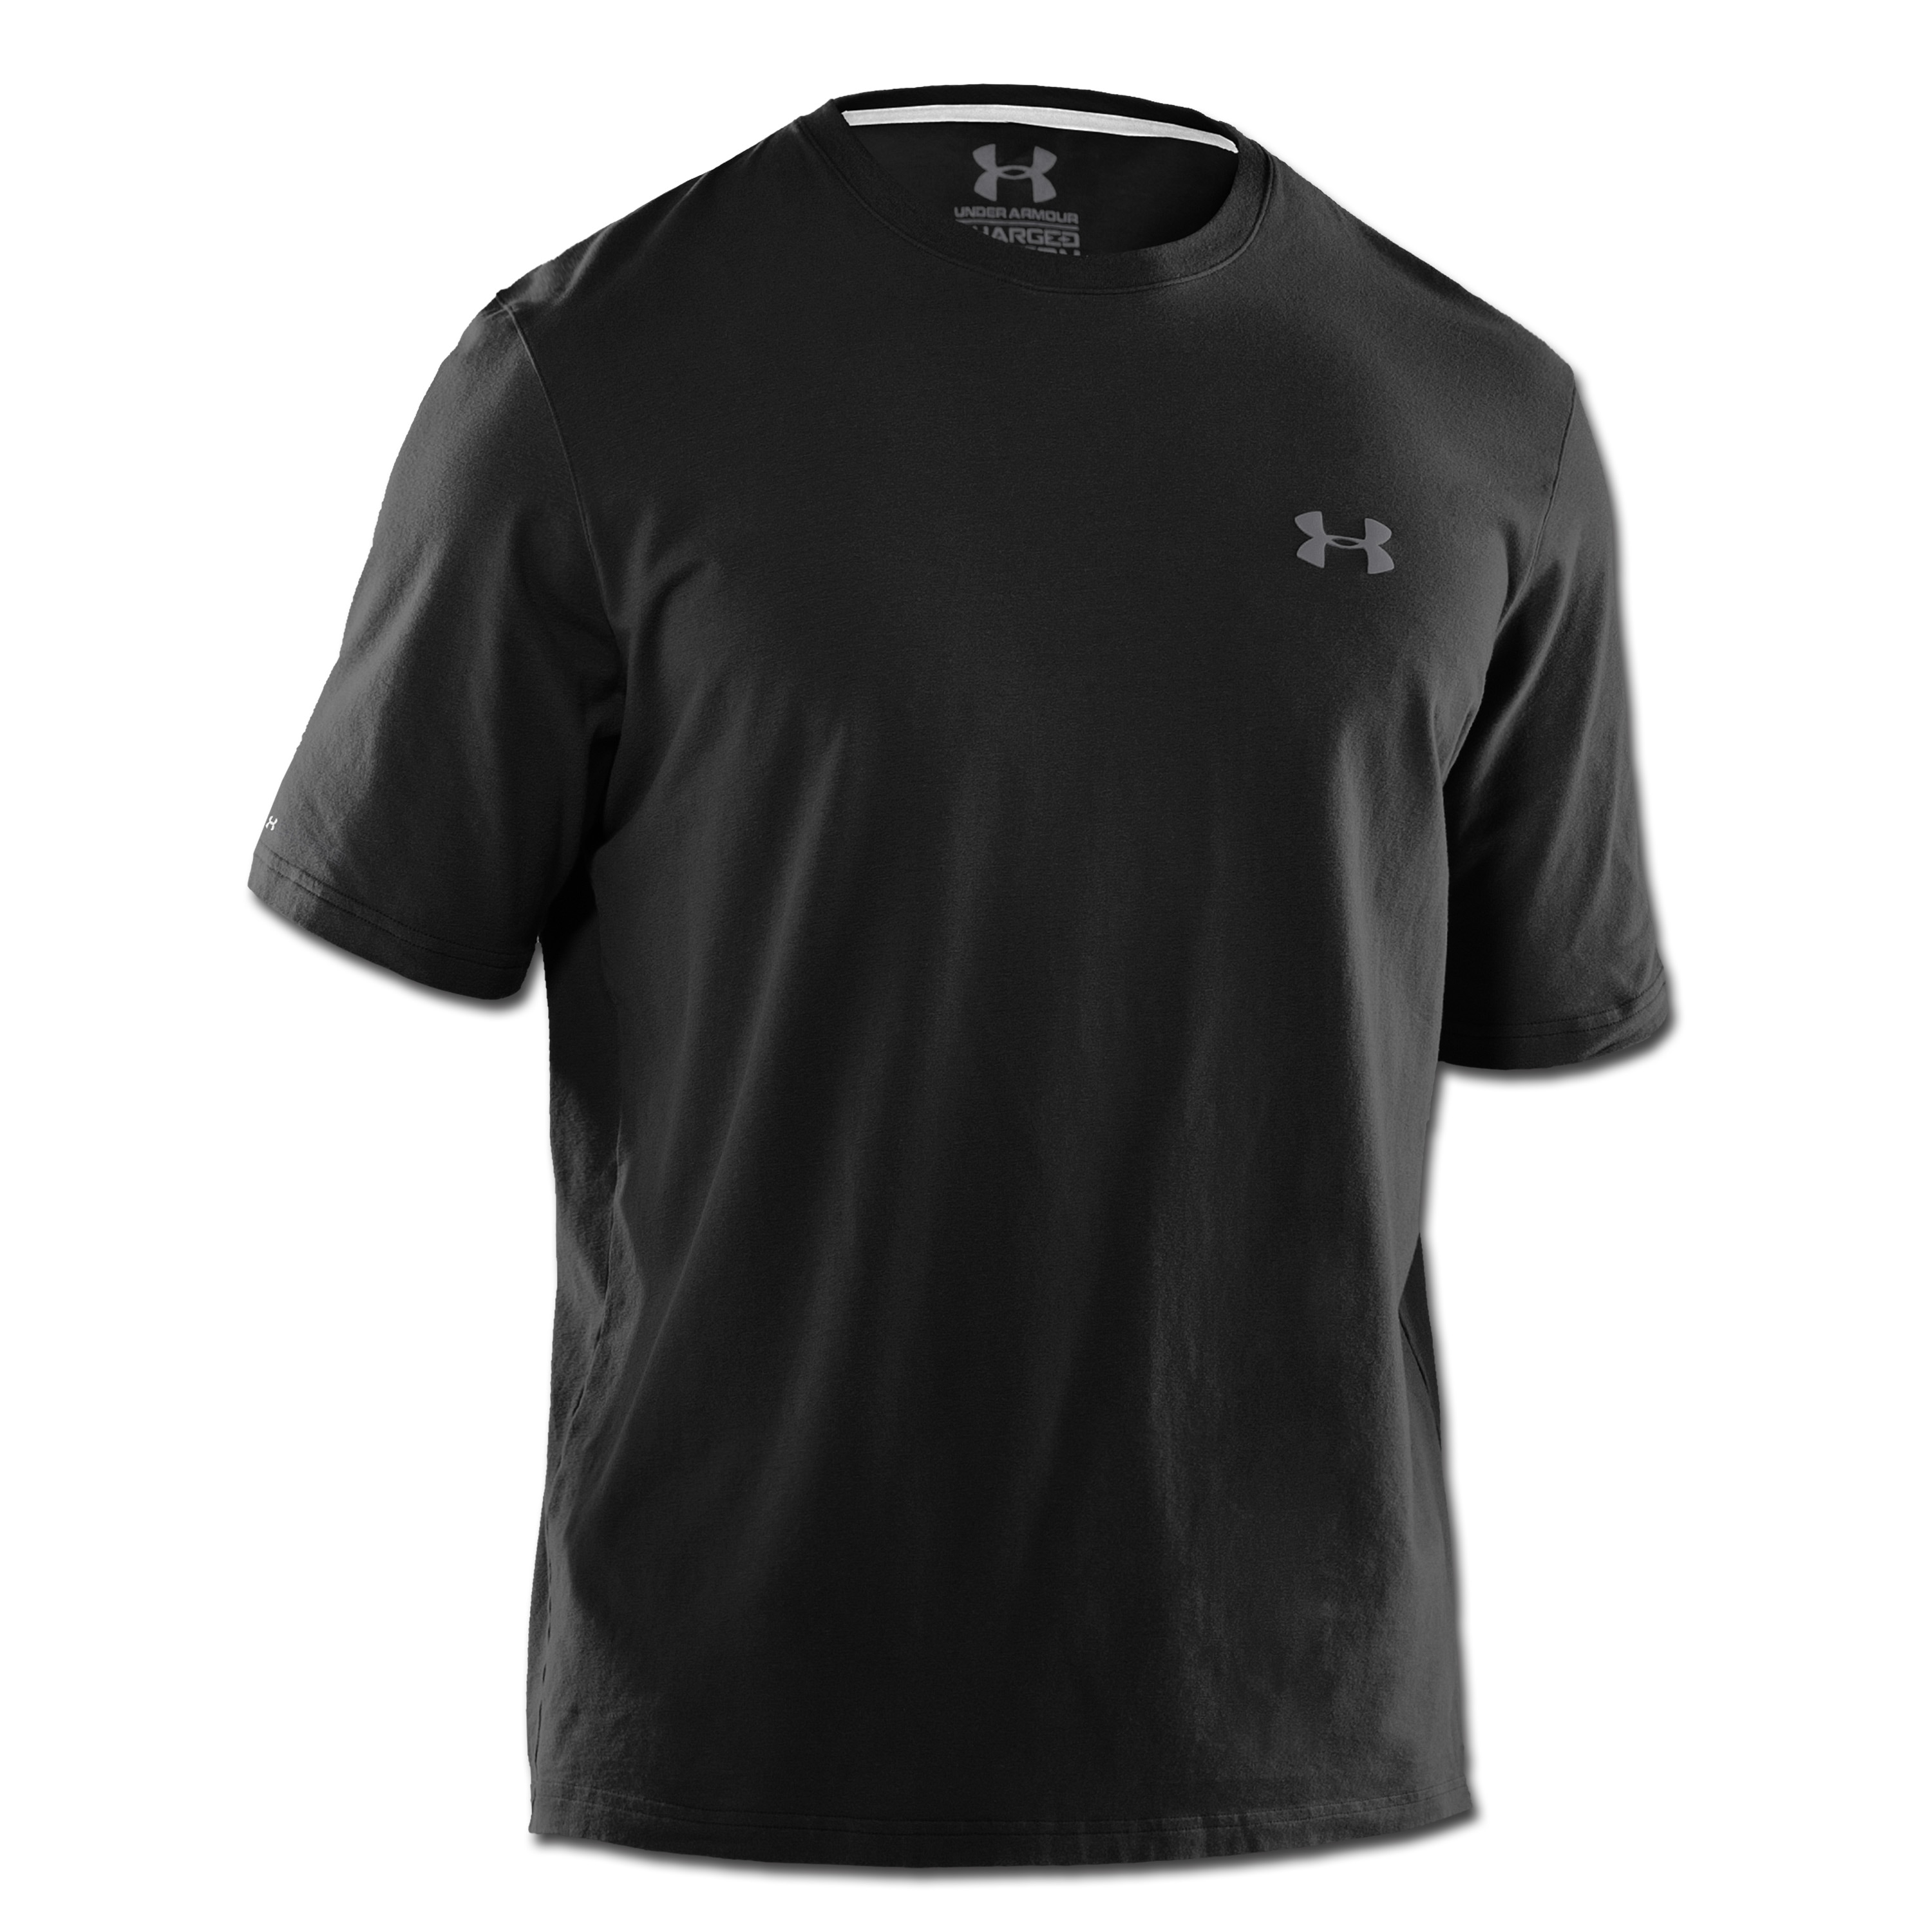 Purchase The Under Armour T Shirt Charged Cotton Black By Asmc